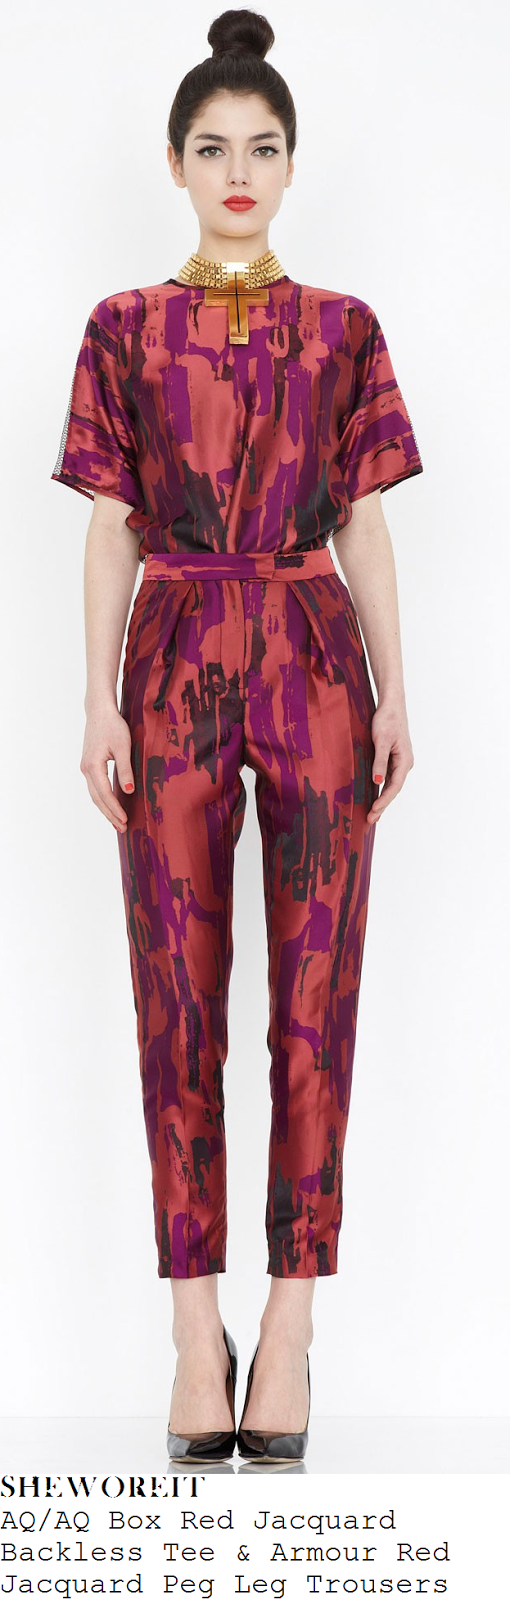 fearne-cotton-red-purple-and-black-paint-jacquard-short-sleeve-mesh-back-top-and-high-waisted-trousers